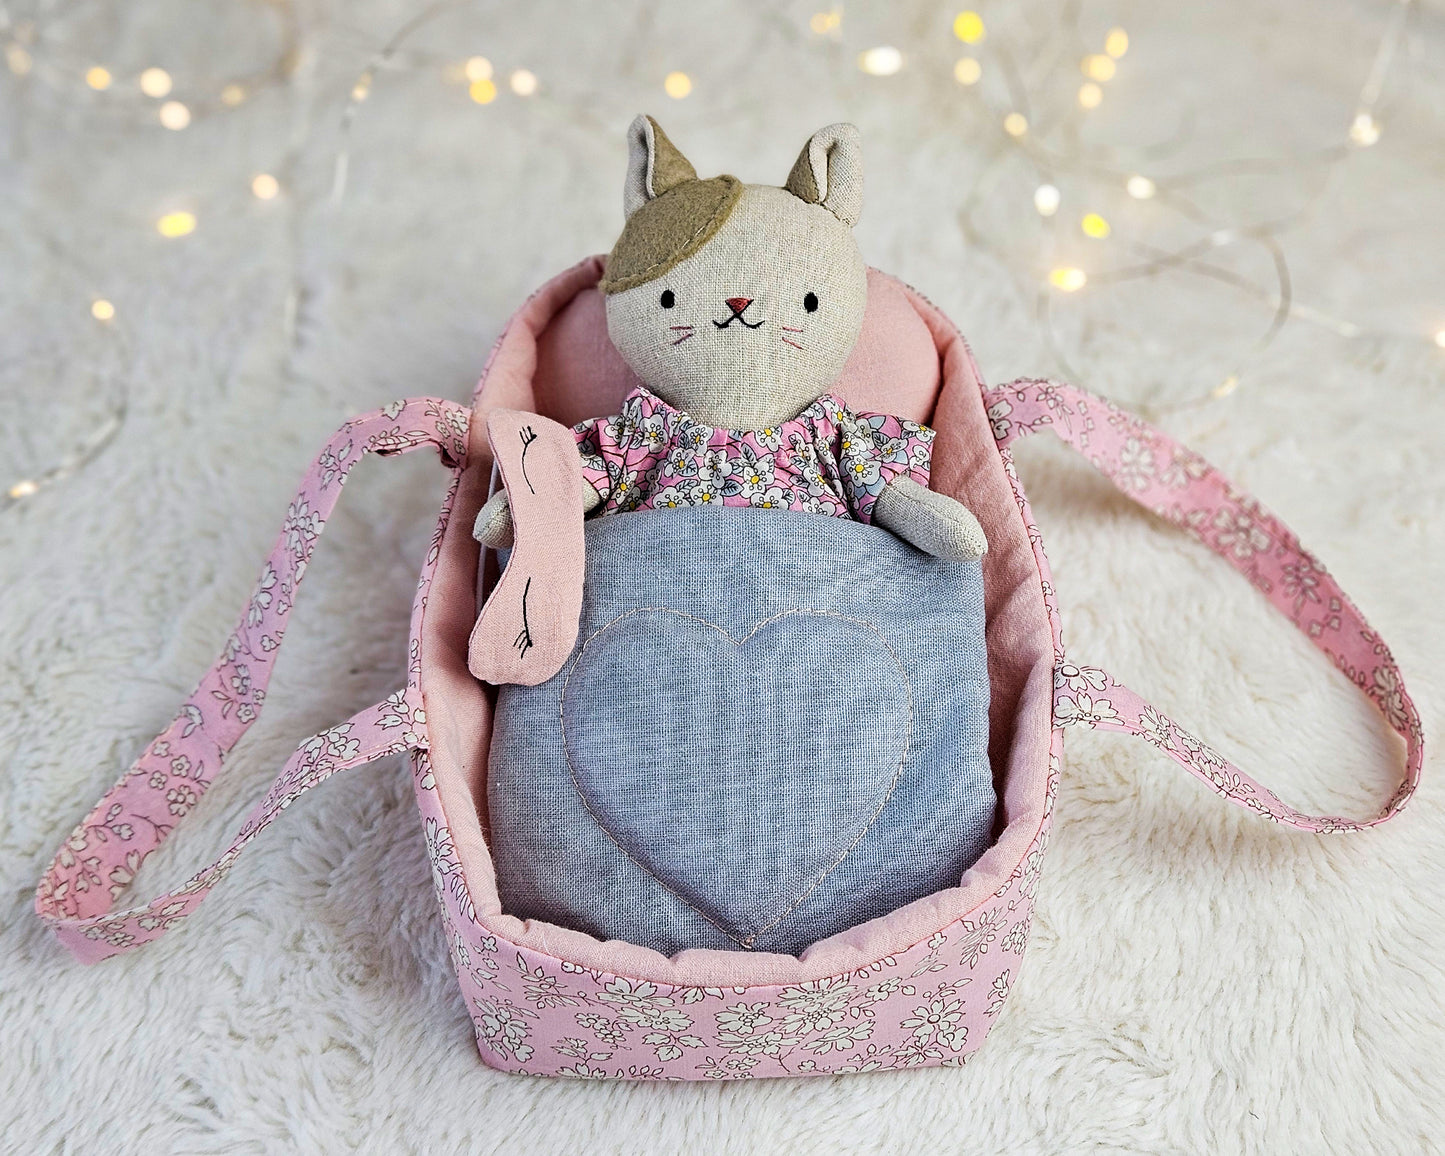 Mini Cat Doll in doll carrier - PDF sewing pattern and tutorial